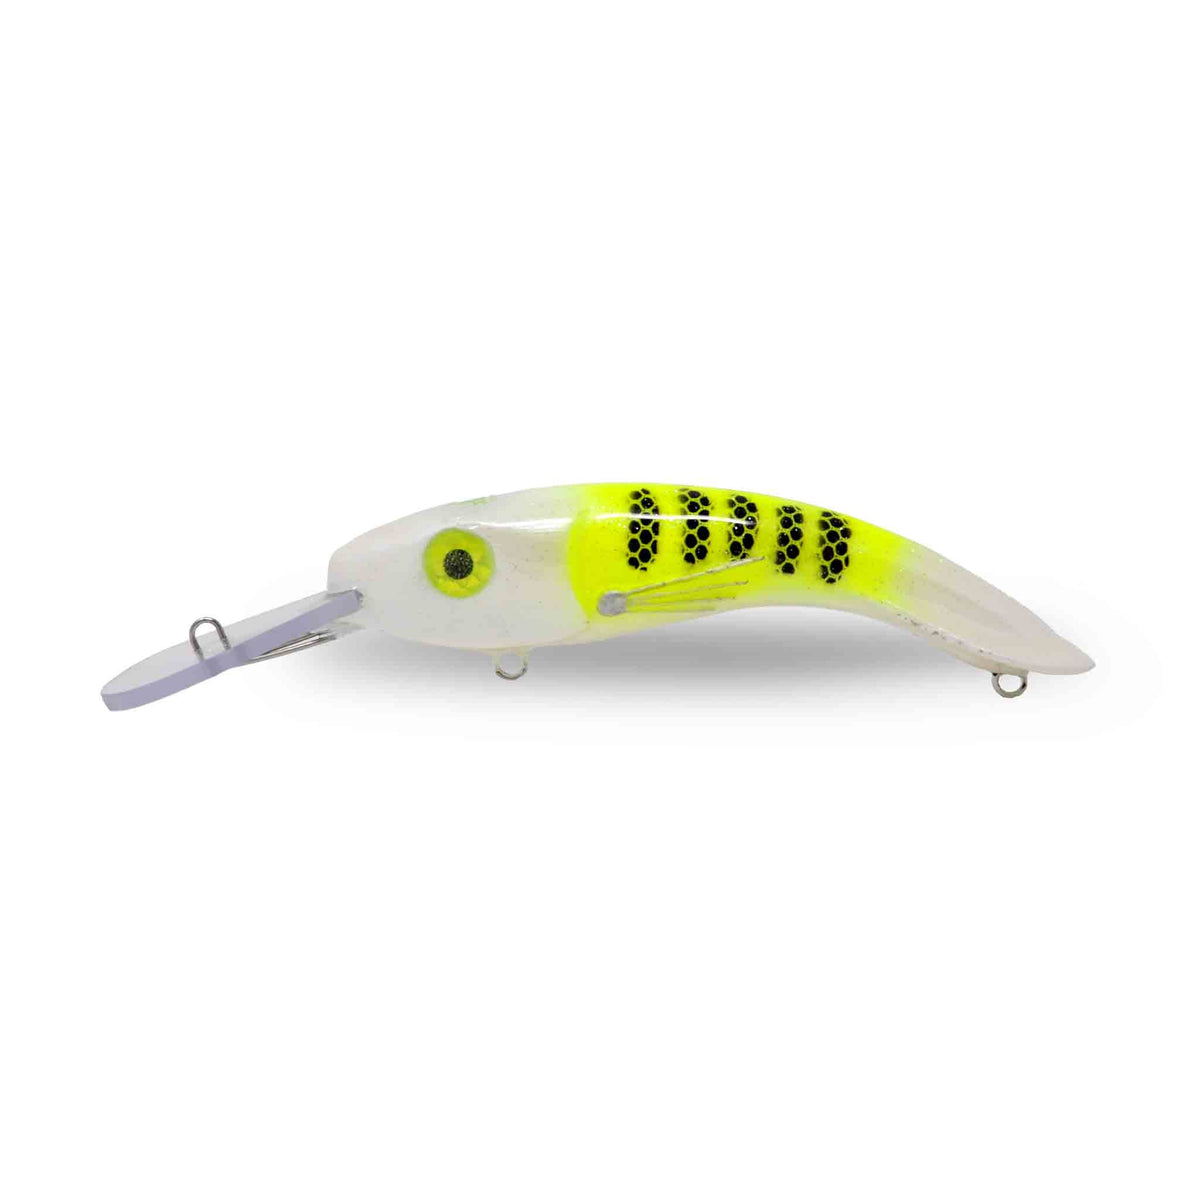 Evergreen COVER CRANKIN' CRAZY CRADLE Fishing Lure (A127